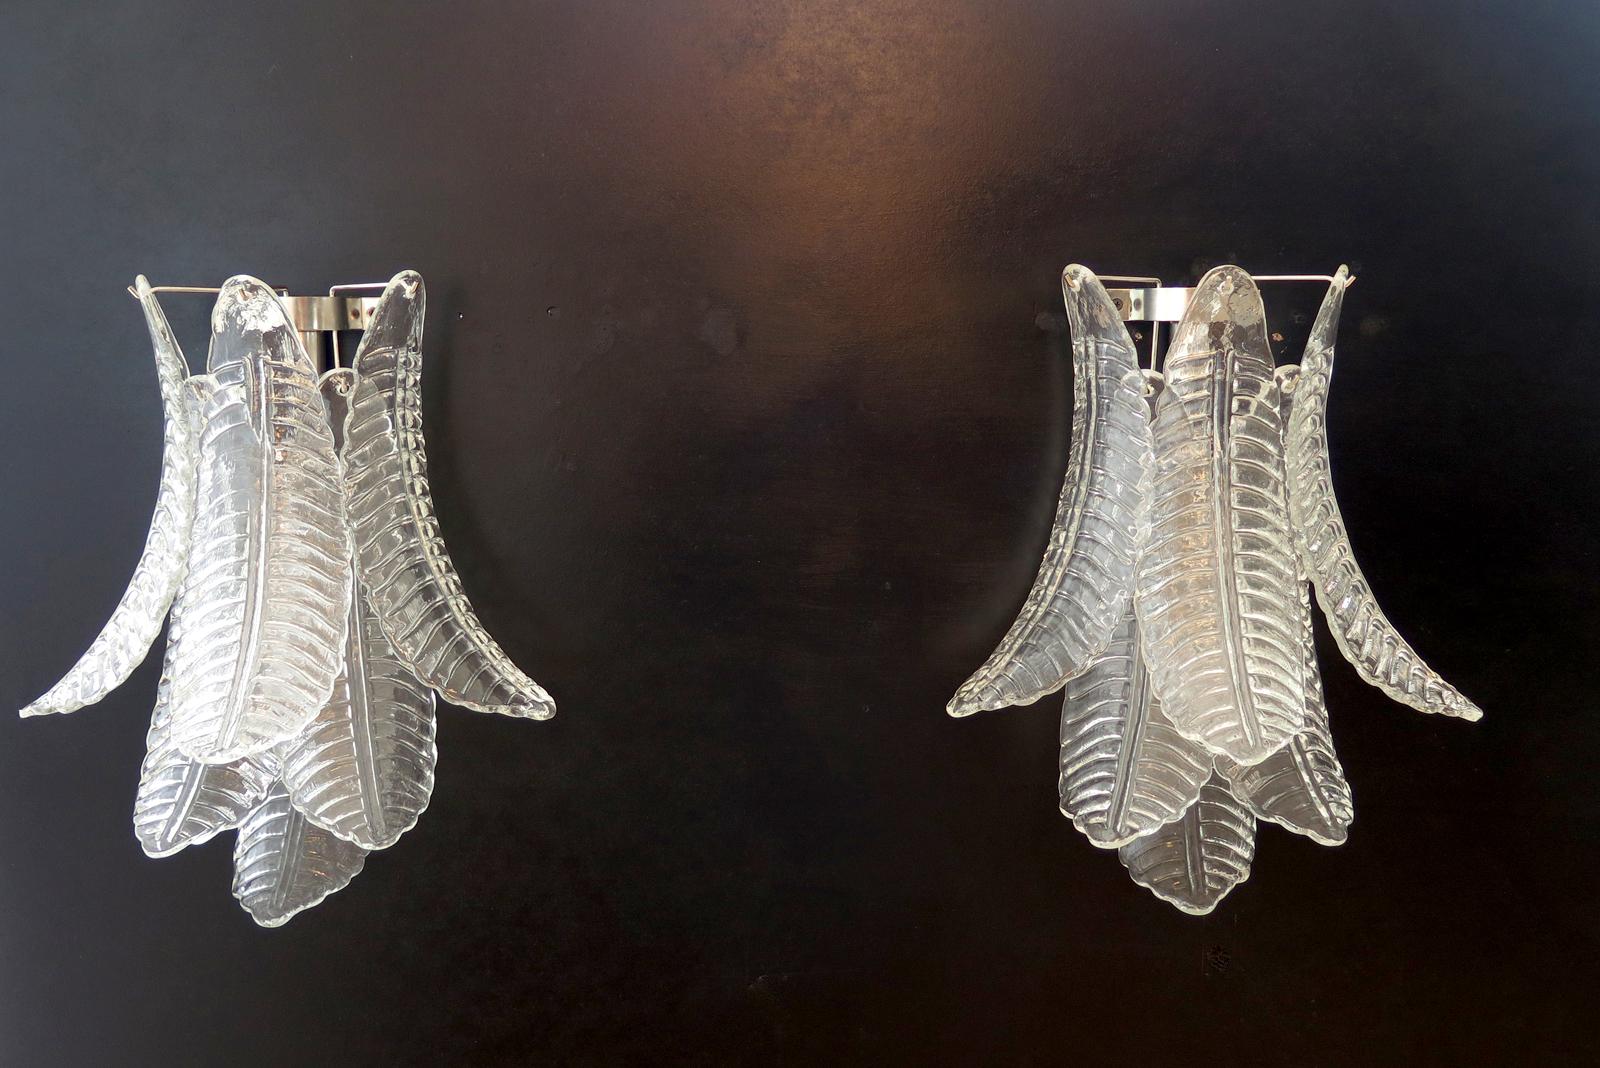 Fantastic pair of vintage Murano wall sconce made by 6 Murano trasparent Six-Tier Felci for each applique in a chrome metal frame.
Period: late xx century
Dimensions: 18,50 inches height (47 cm); 14,60 inches width (37 cm); 9 inches depth from the